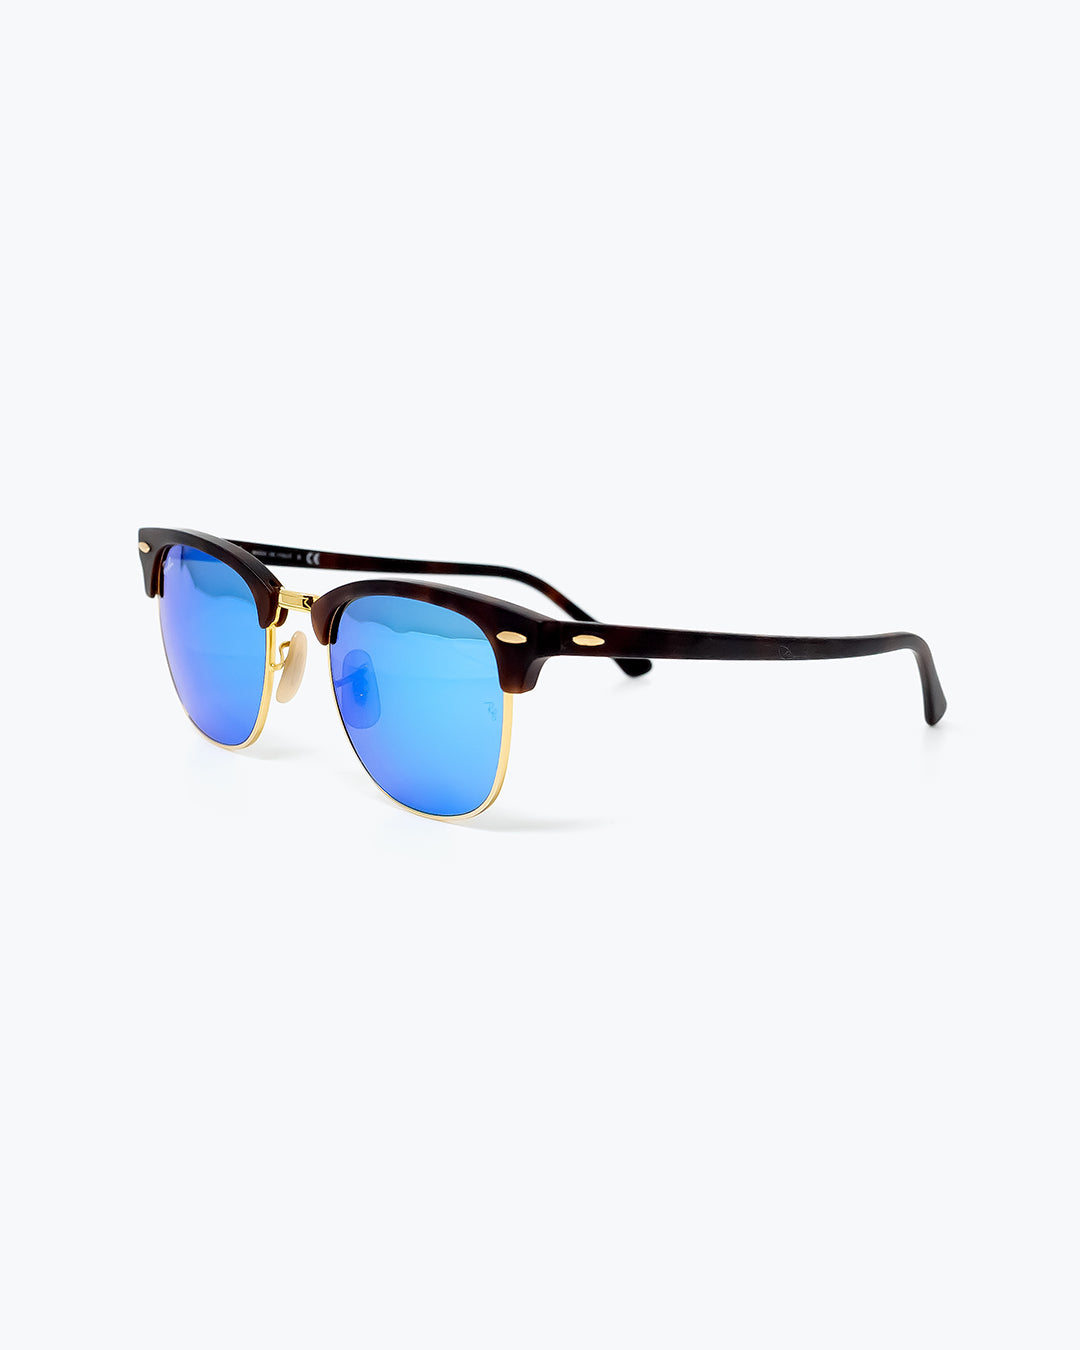 Ray Ban Clubmaster Classic - Model - RB3016